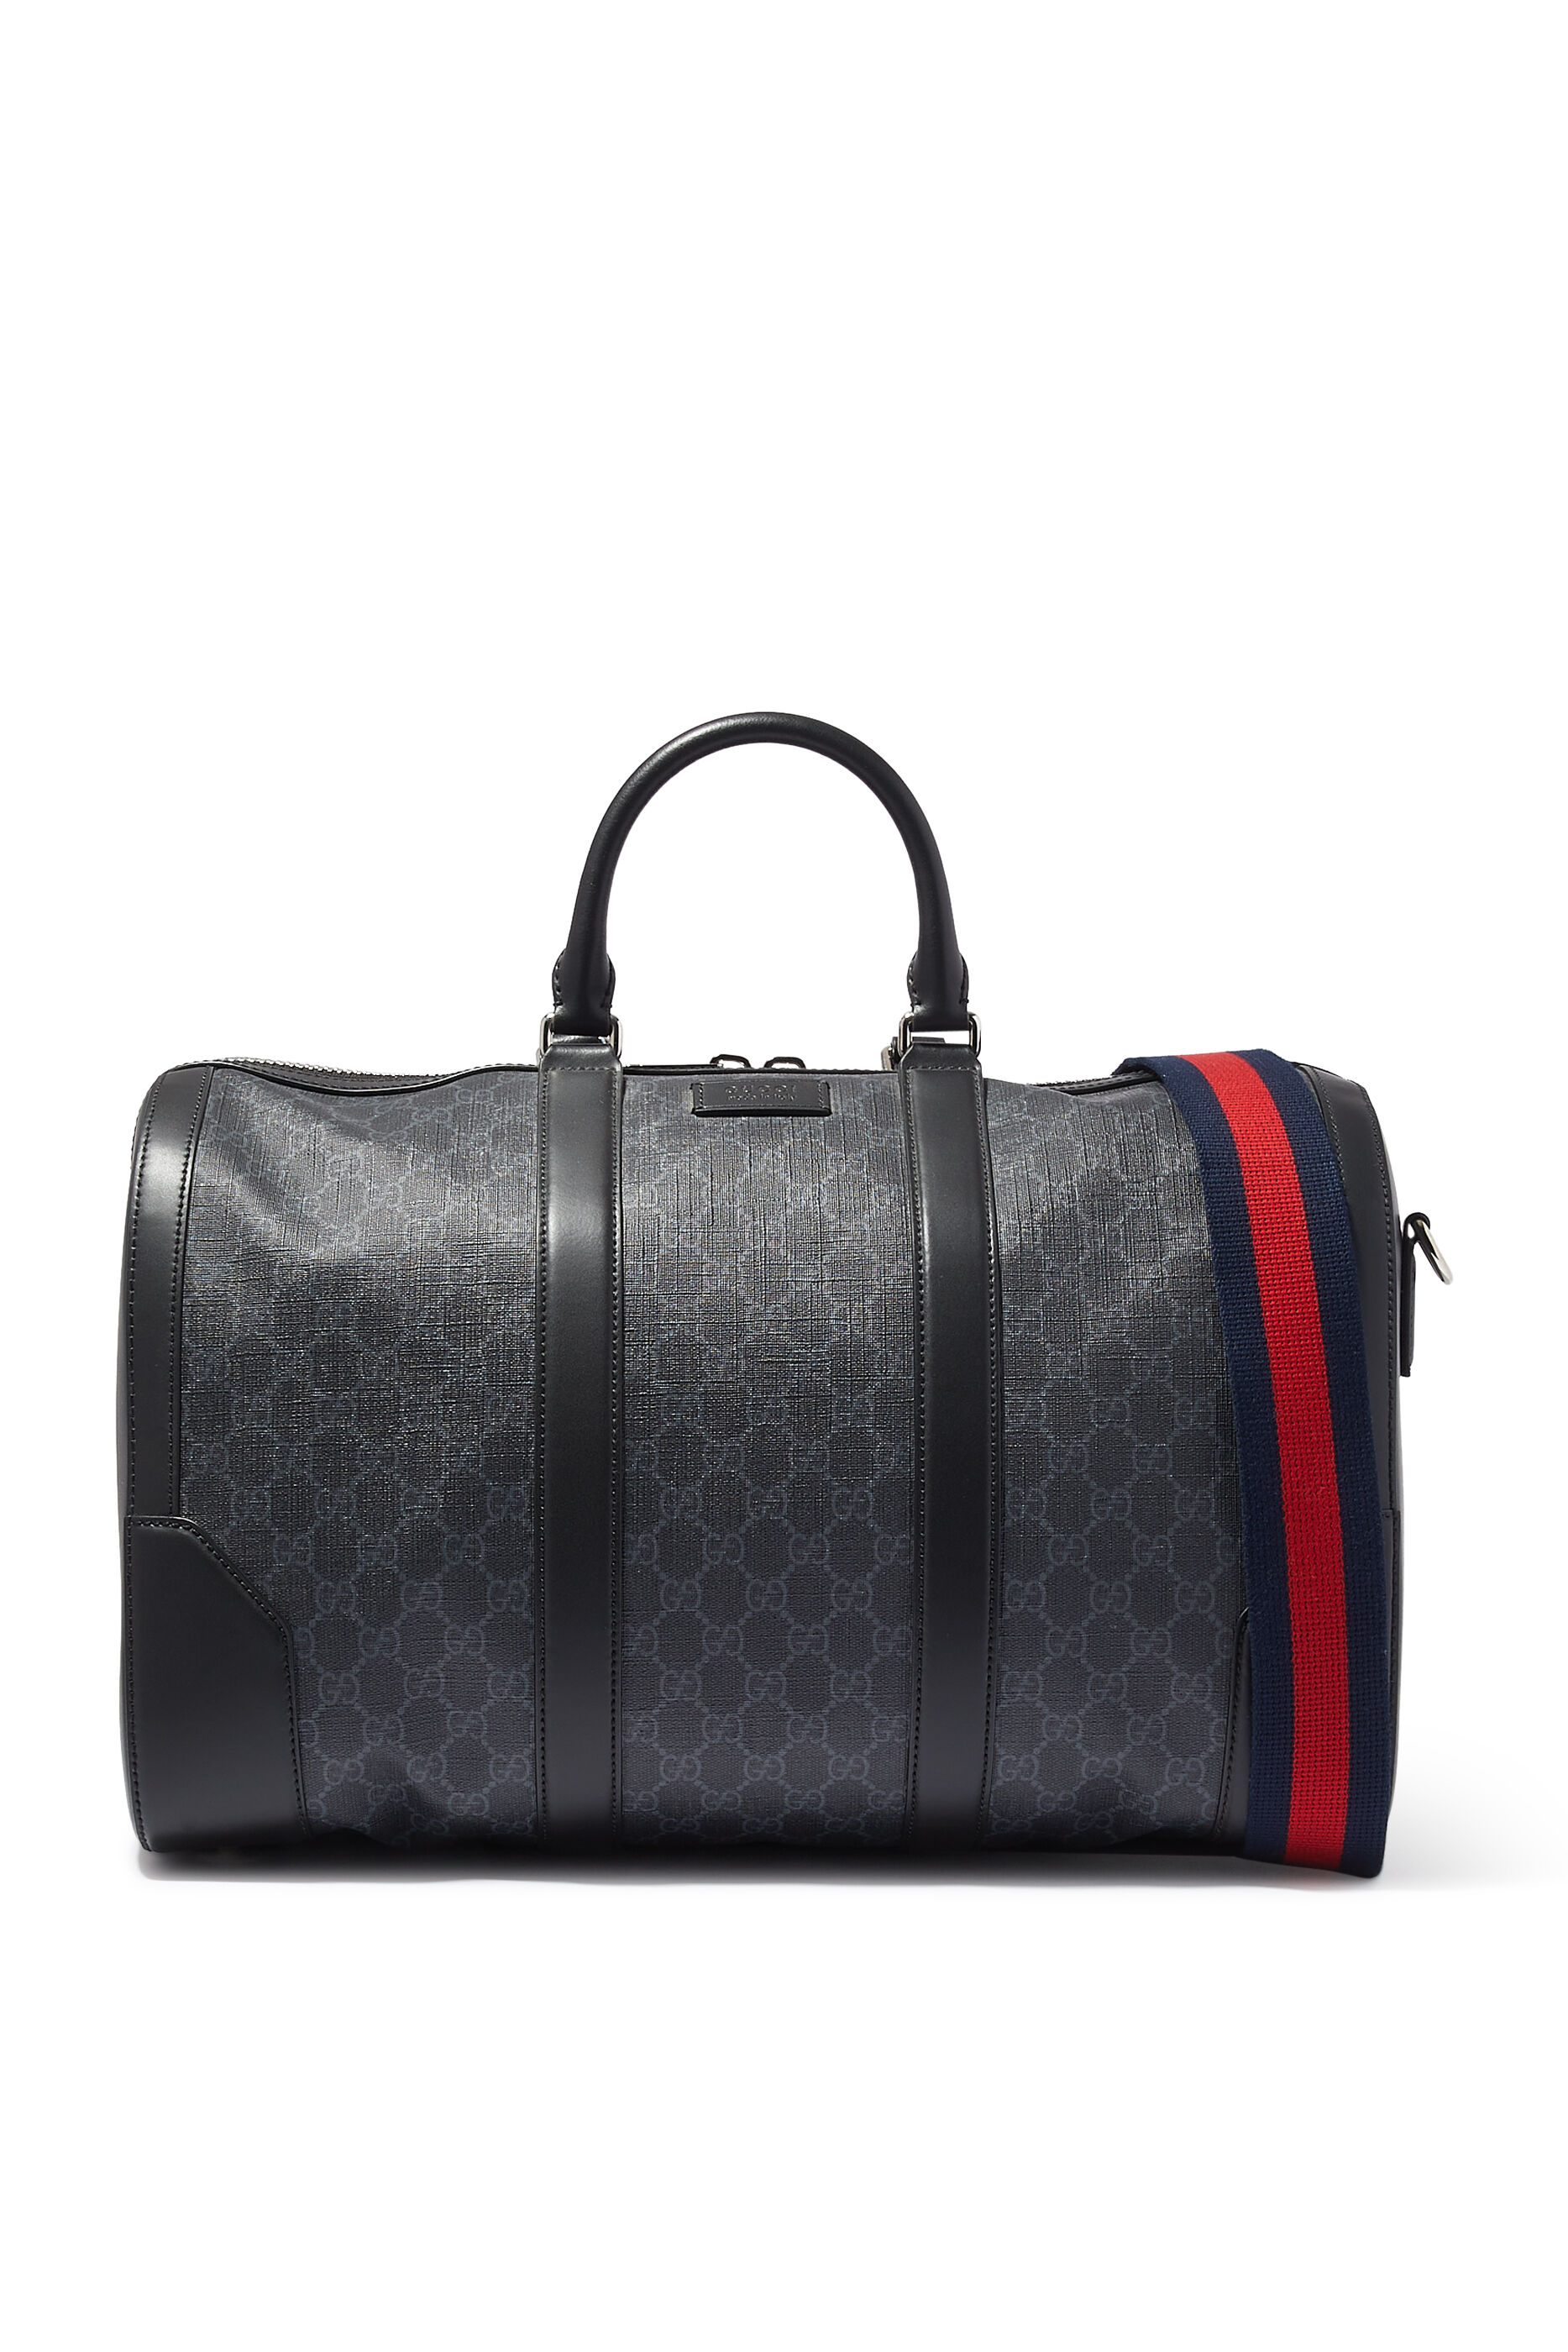 Mens Gucci Bags  Leather  Canvas Bags  Harrods UK